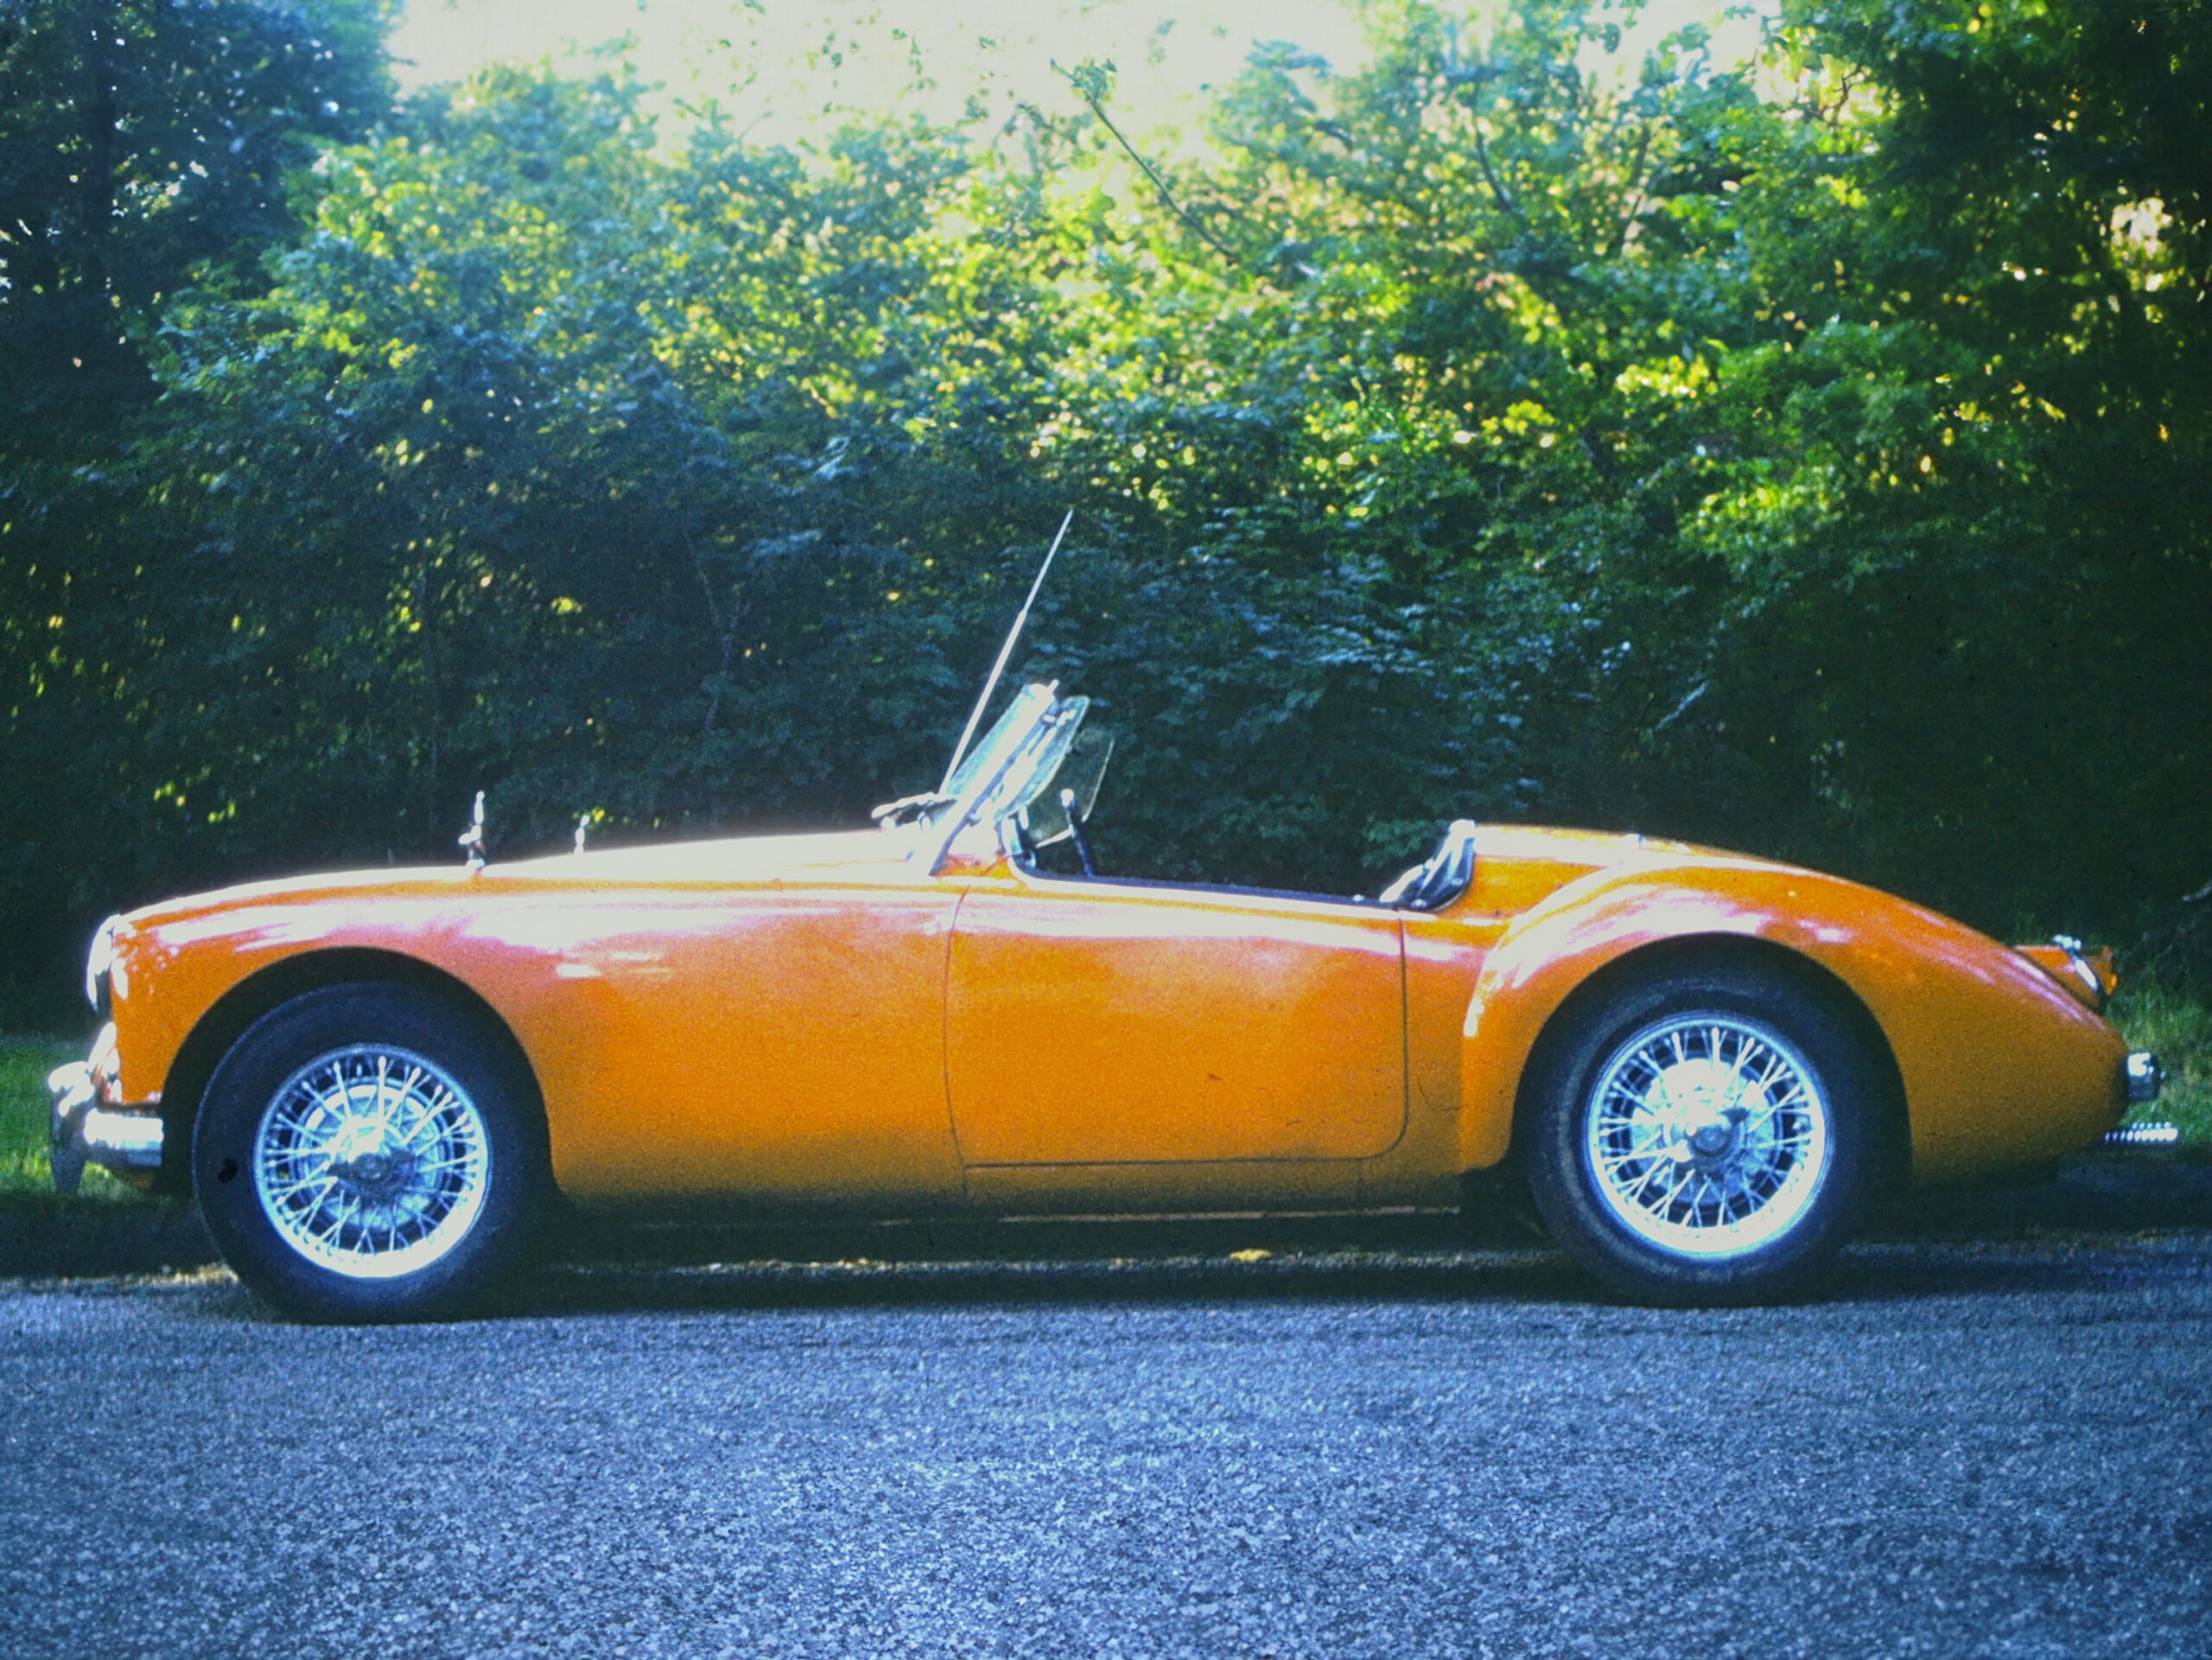 1957 MGA High-School Cool: Hair-Raising Adventures in My Very First Car